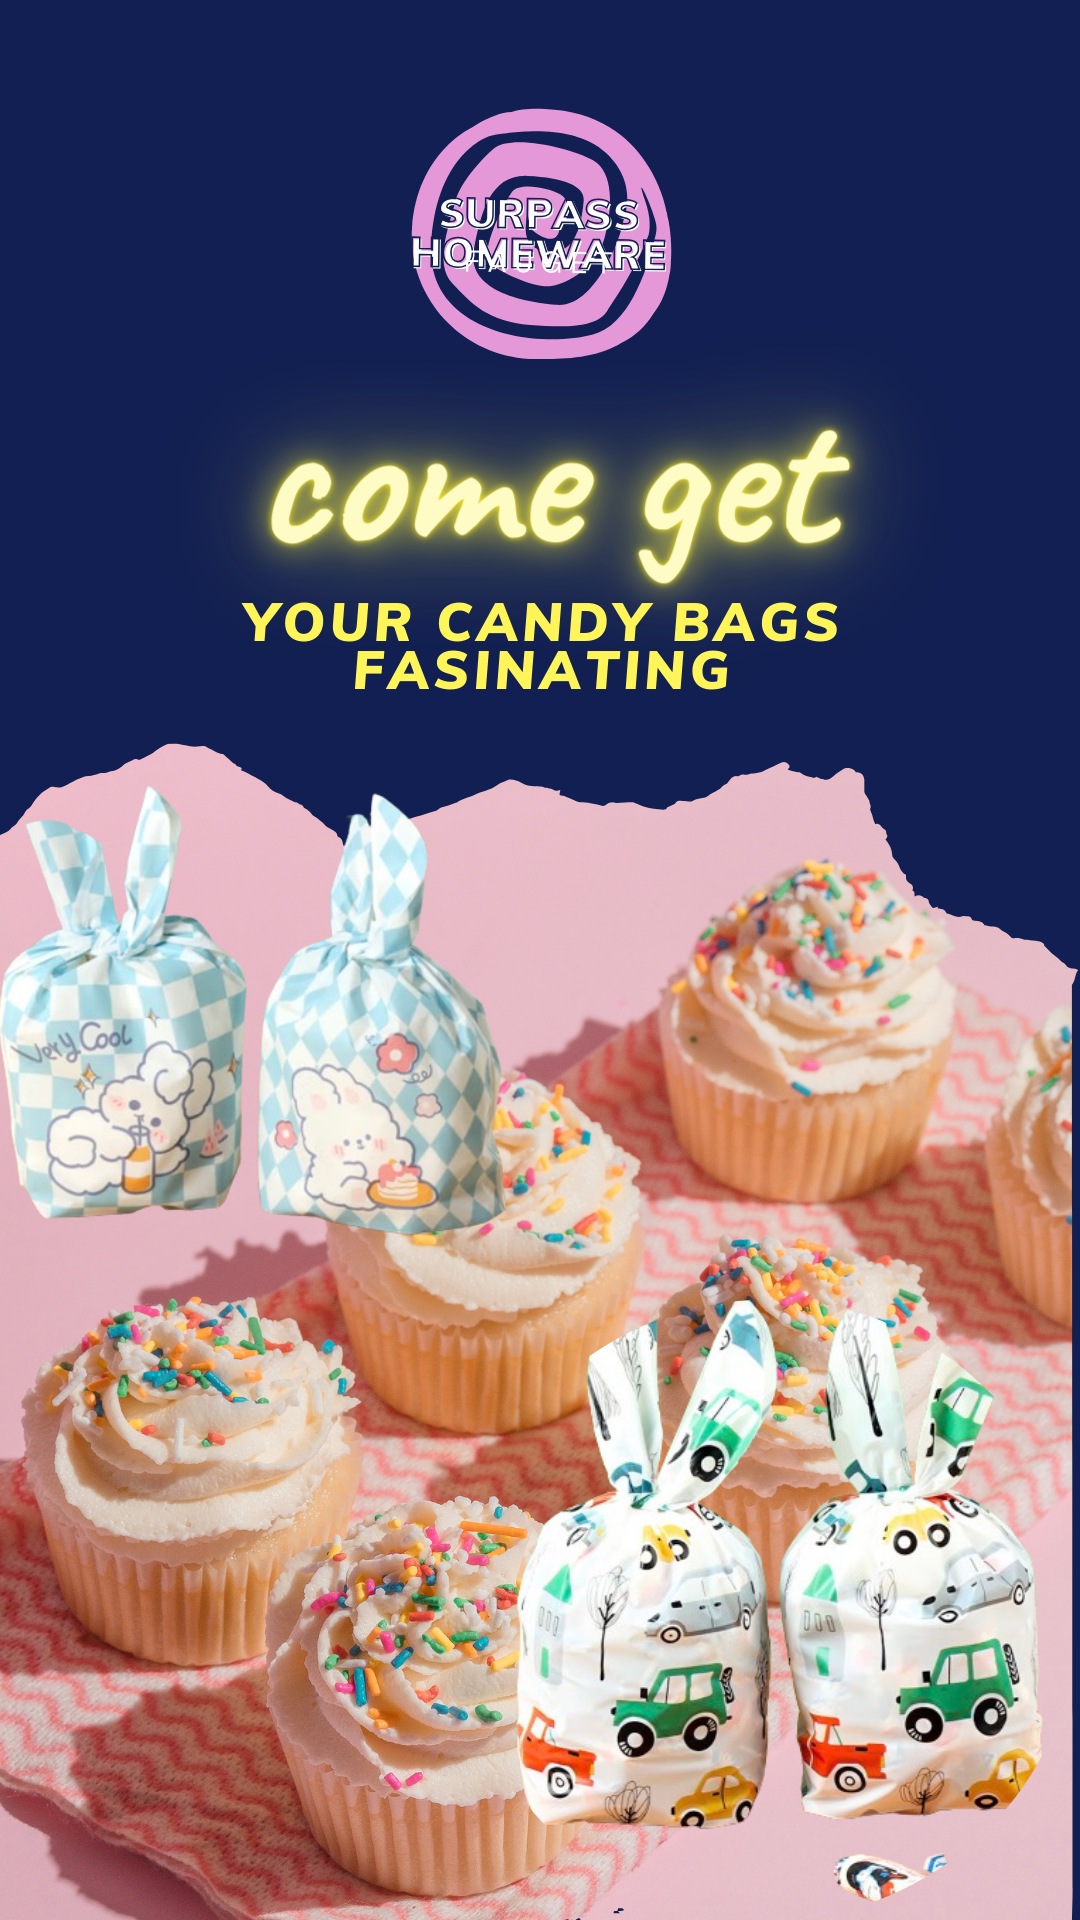 50pcs Cartoon Candy Bag Dessert Cookie Pouch Cute Bakery Bag Kids Goodie Bags Wedding Candy Bag Halloween Candy Holders Kids Candy Bag Plastic Gift Bags Biscuit Child or Cake Bag